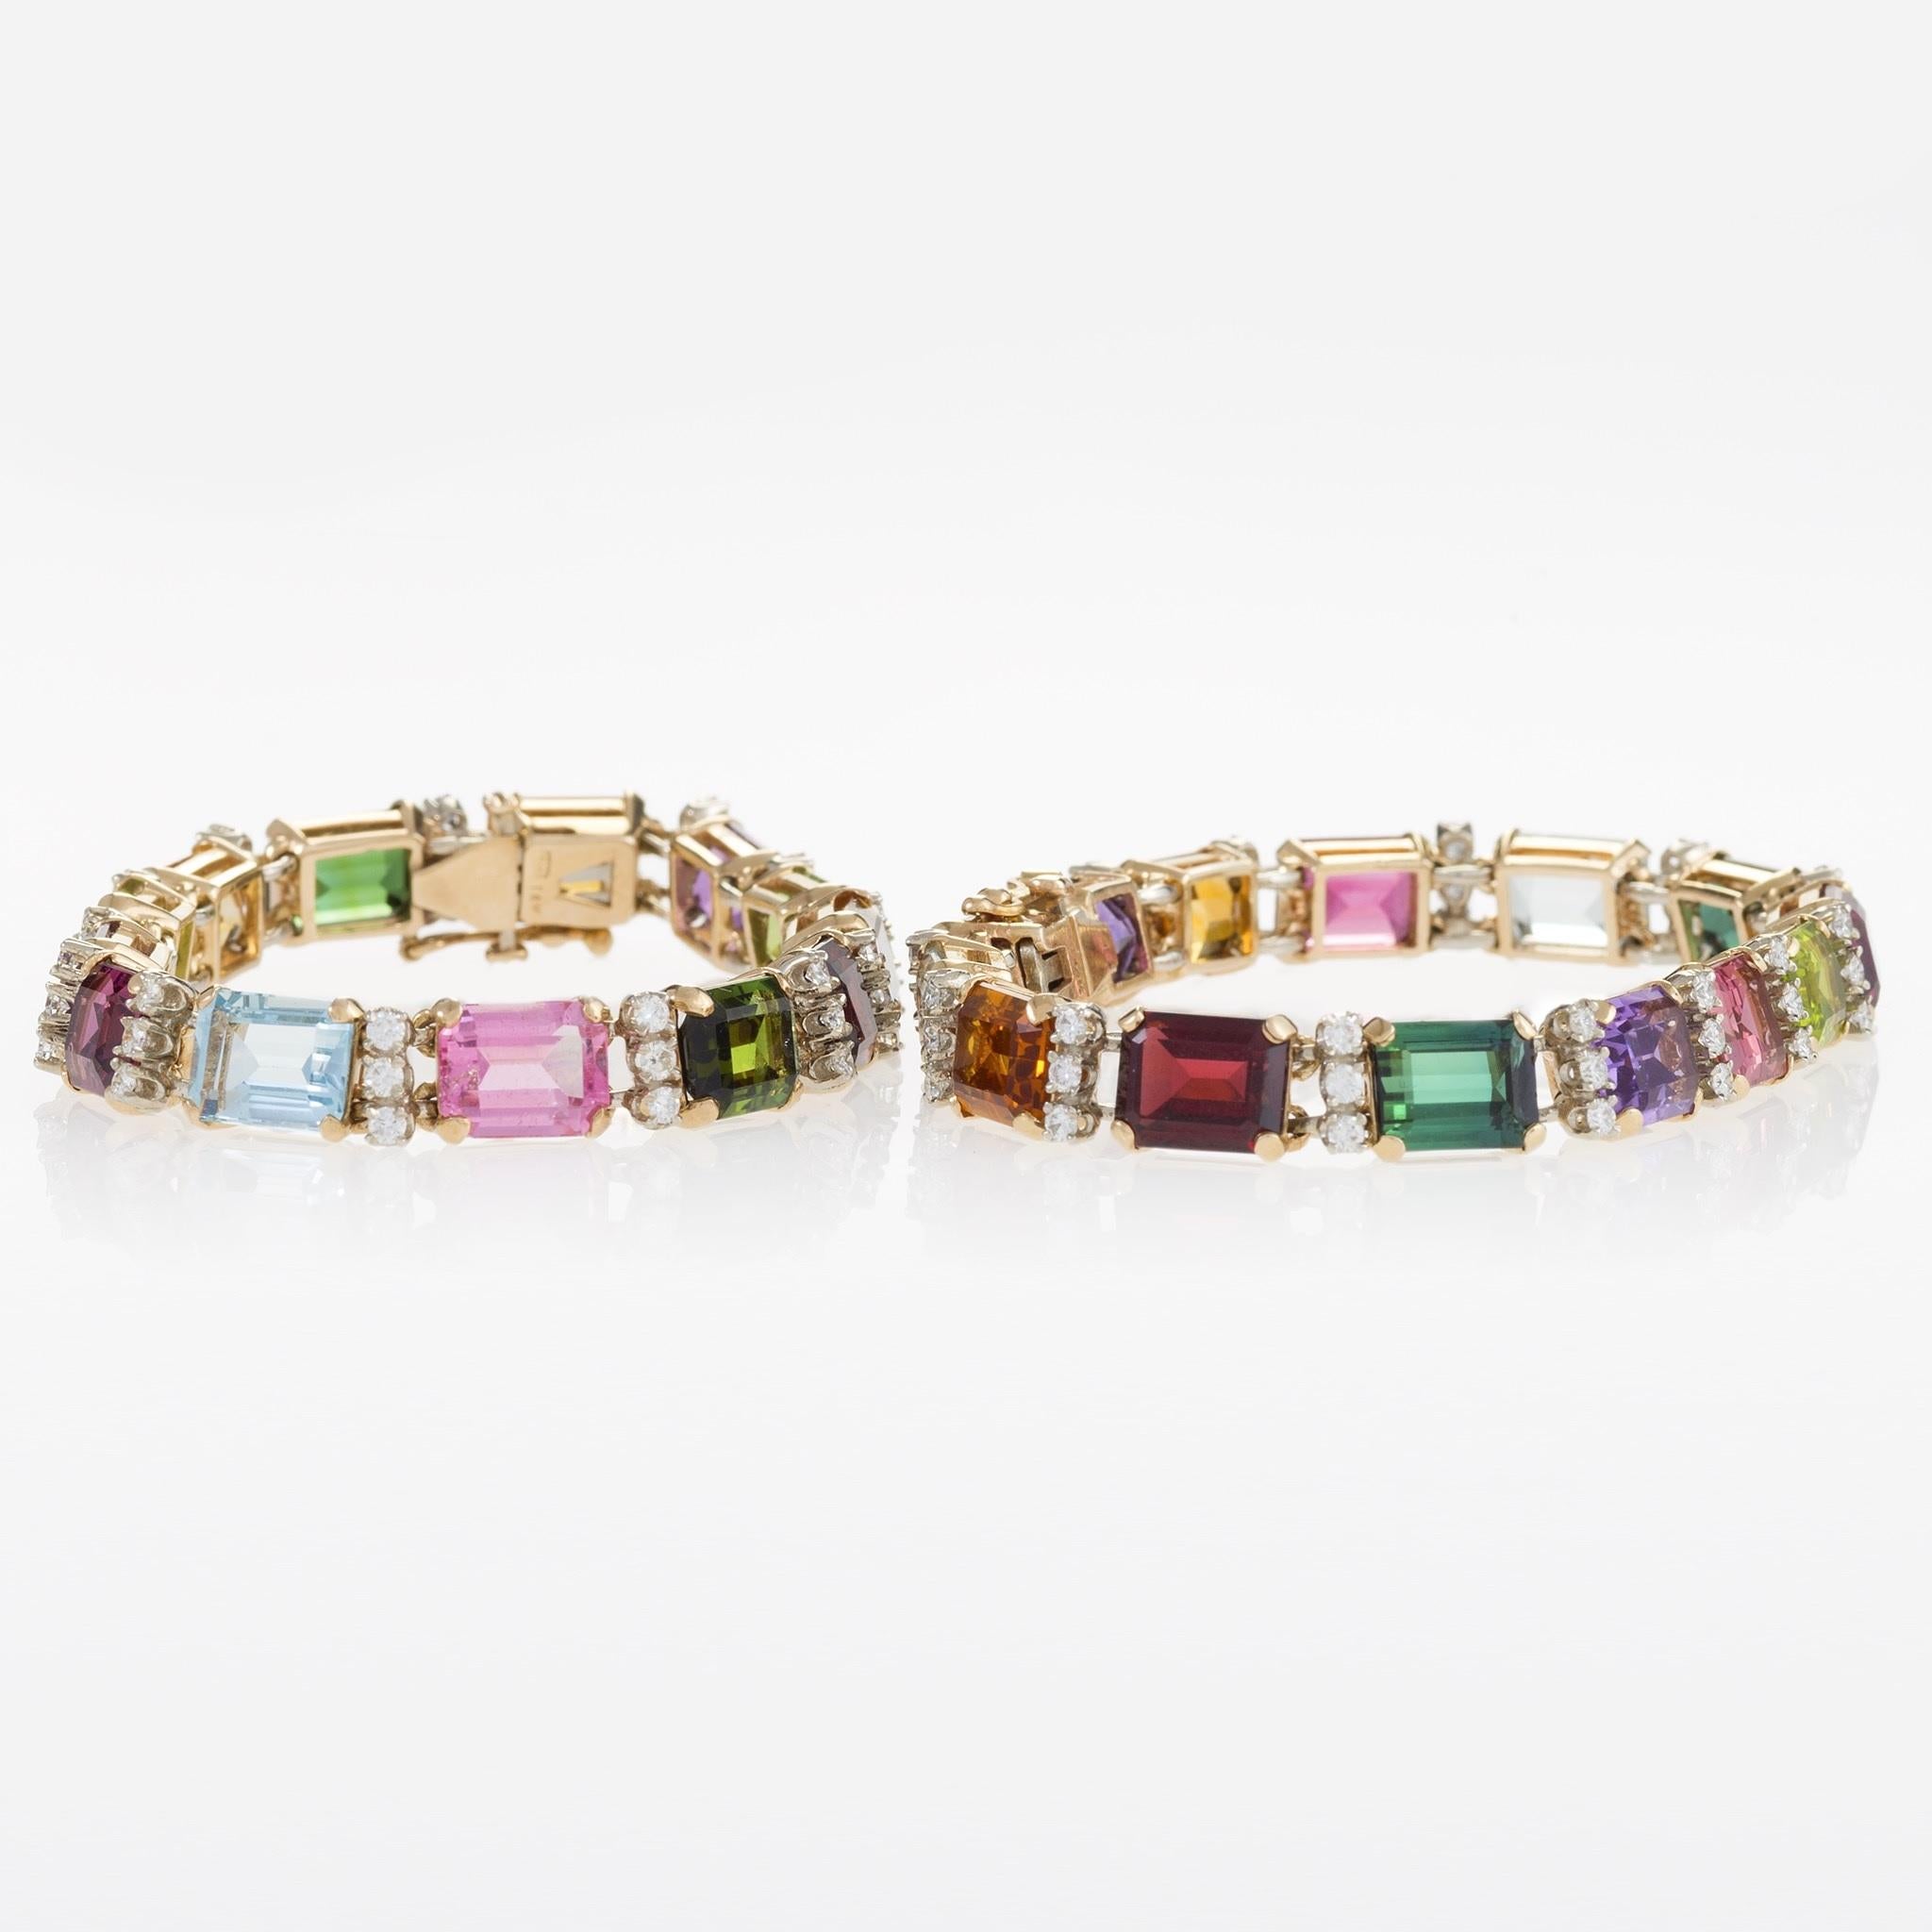 A pair of 14 karat gold bracelets with diamonds and multi-colored gemstones. The bracelets have 81 round brilliant-cut diamonds with an approximate total weight of 3.25 carats, and 27 9mm x 7mm rectangular-cut stones including Amethyst, Citrine,